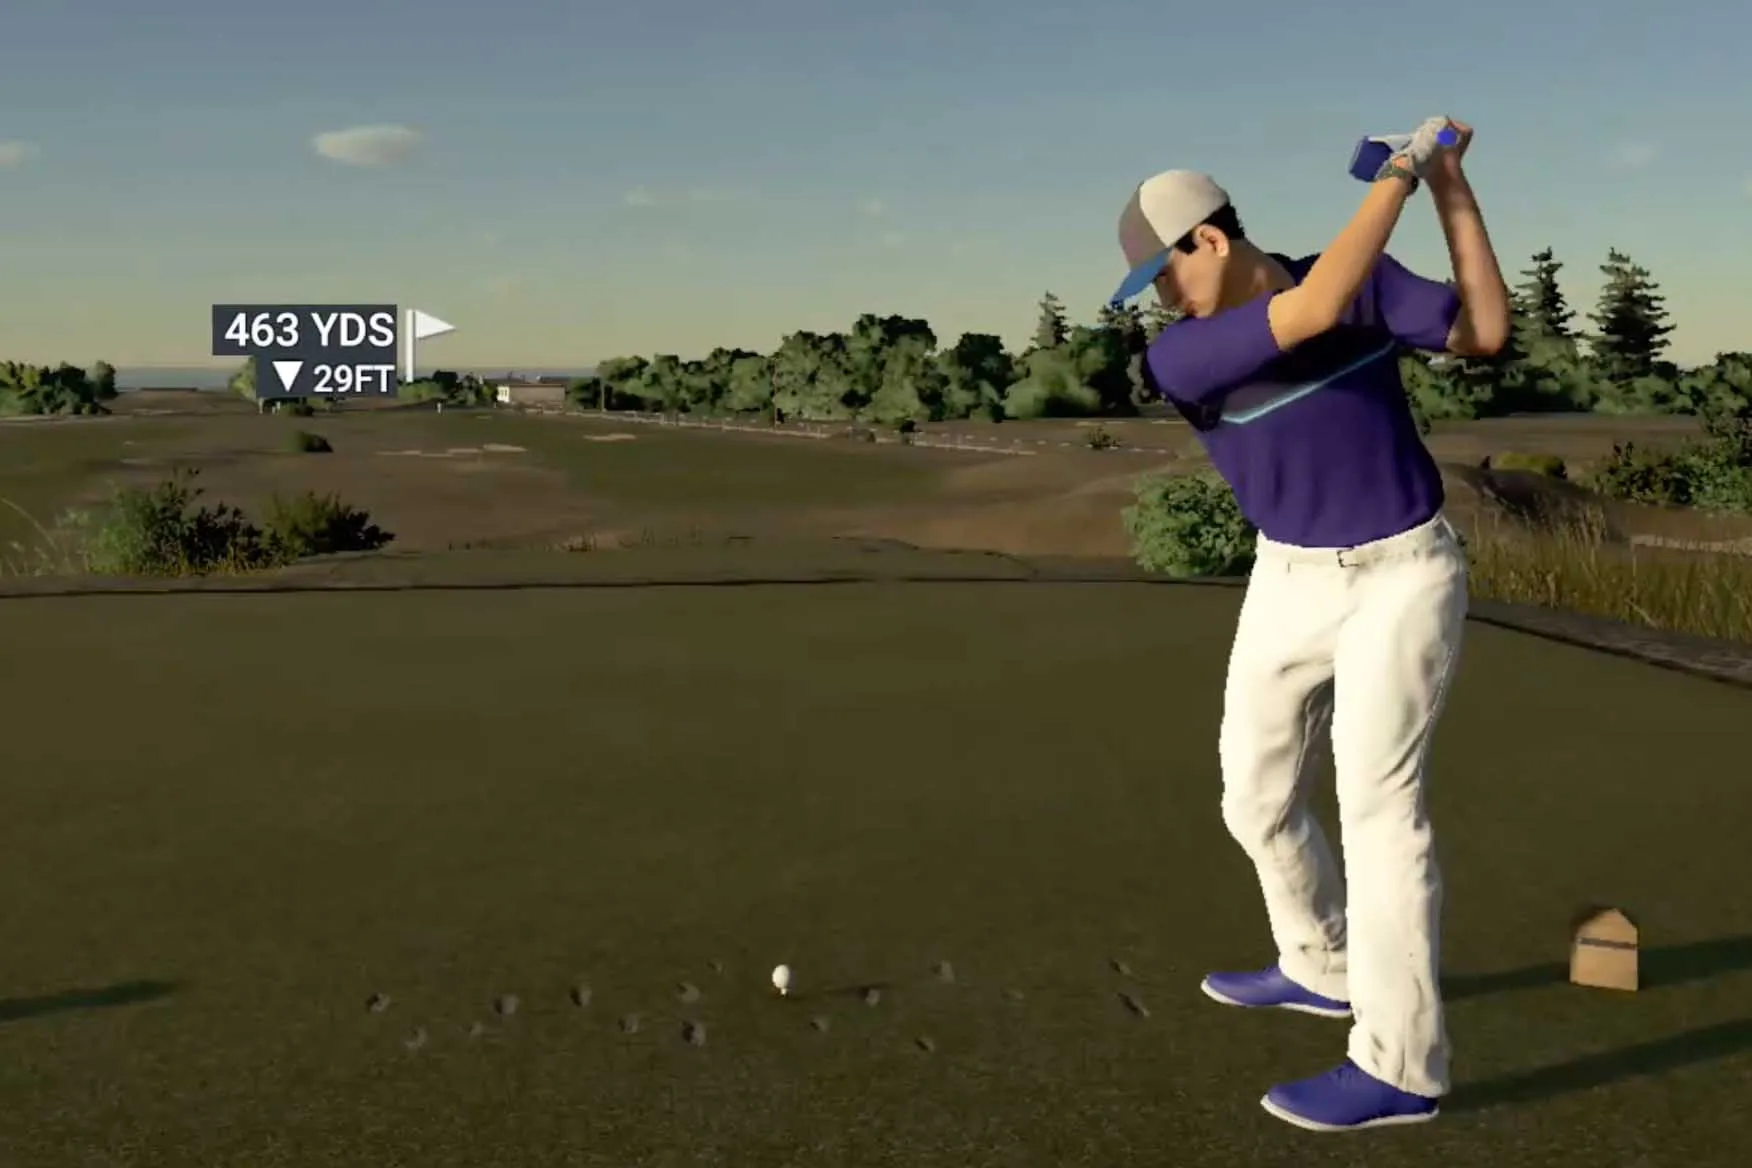 Meet the man painstakingly recreating Britain's best golf courses for you to play on a video game